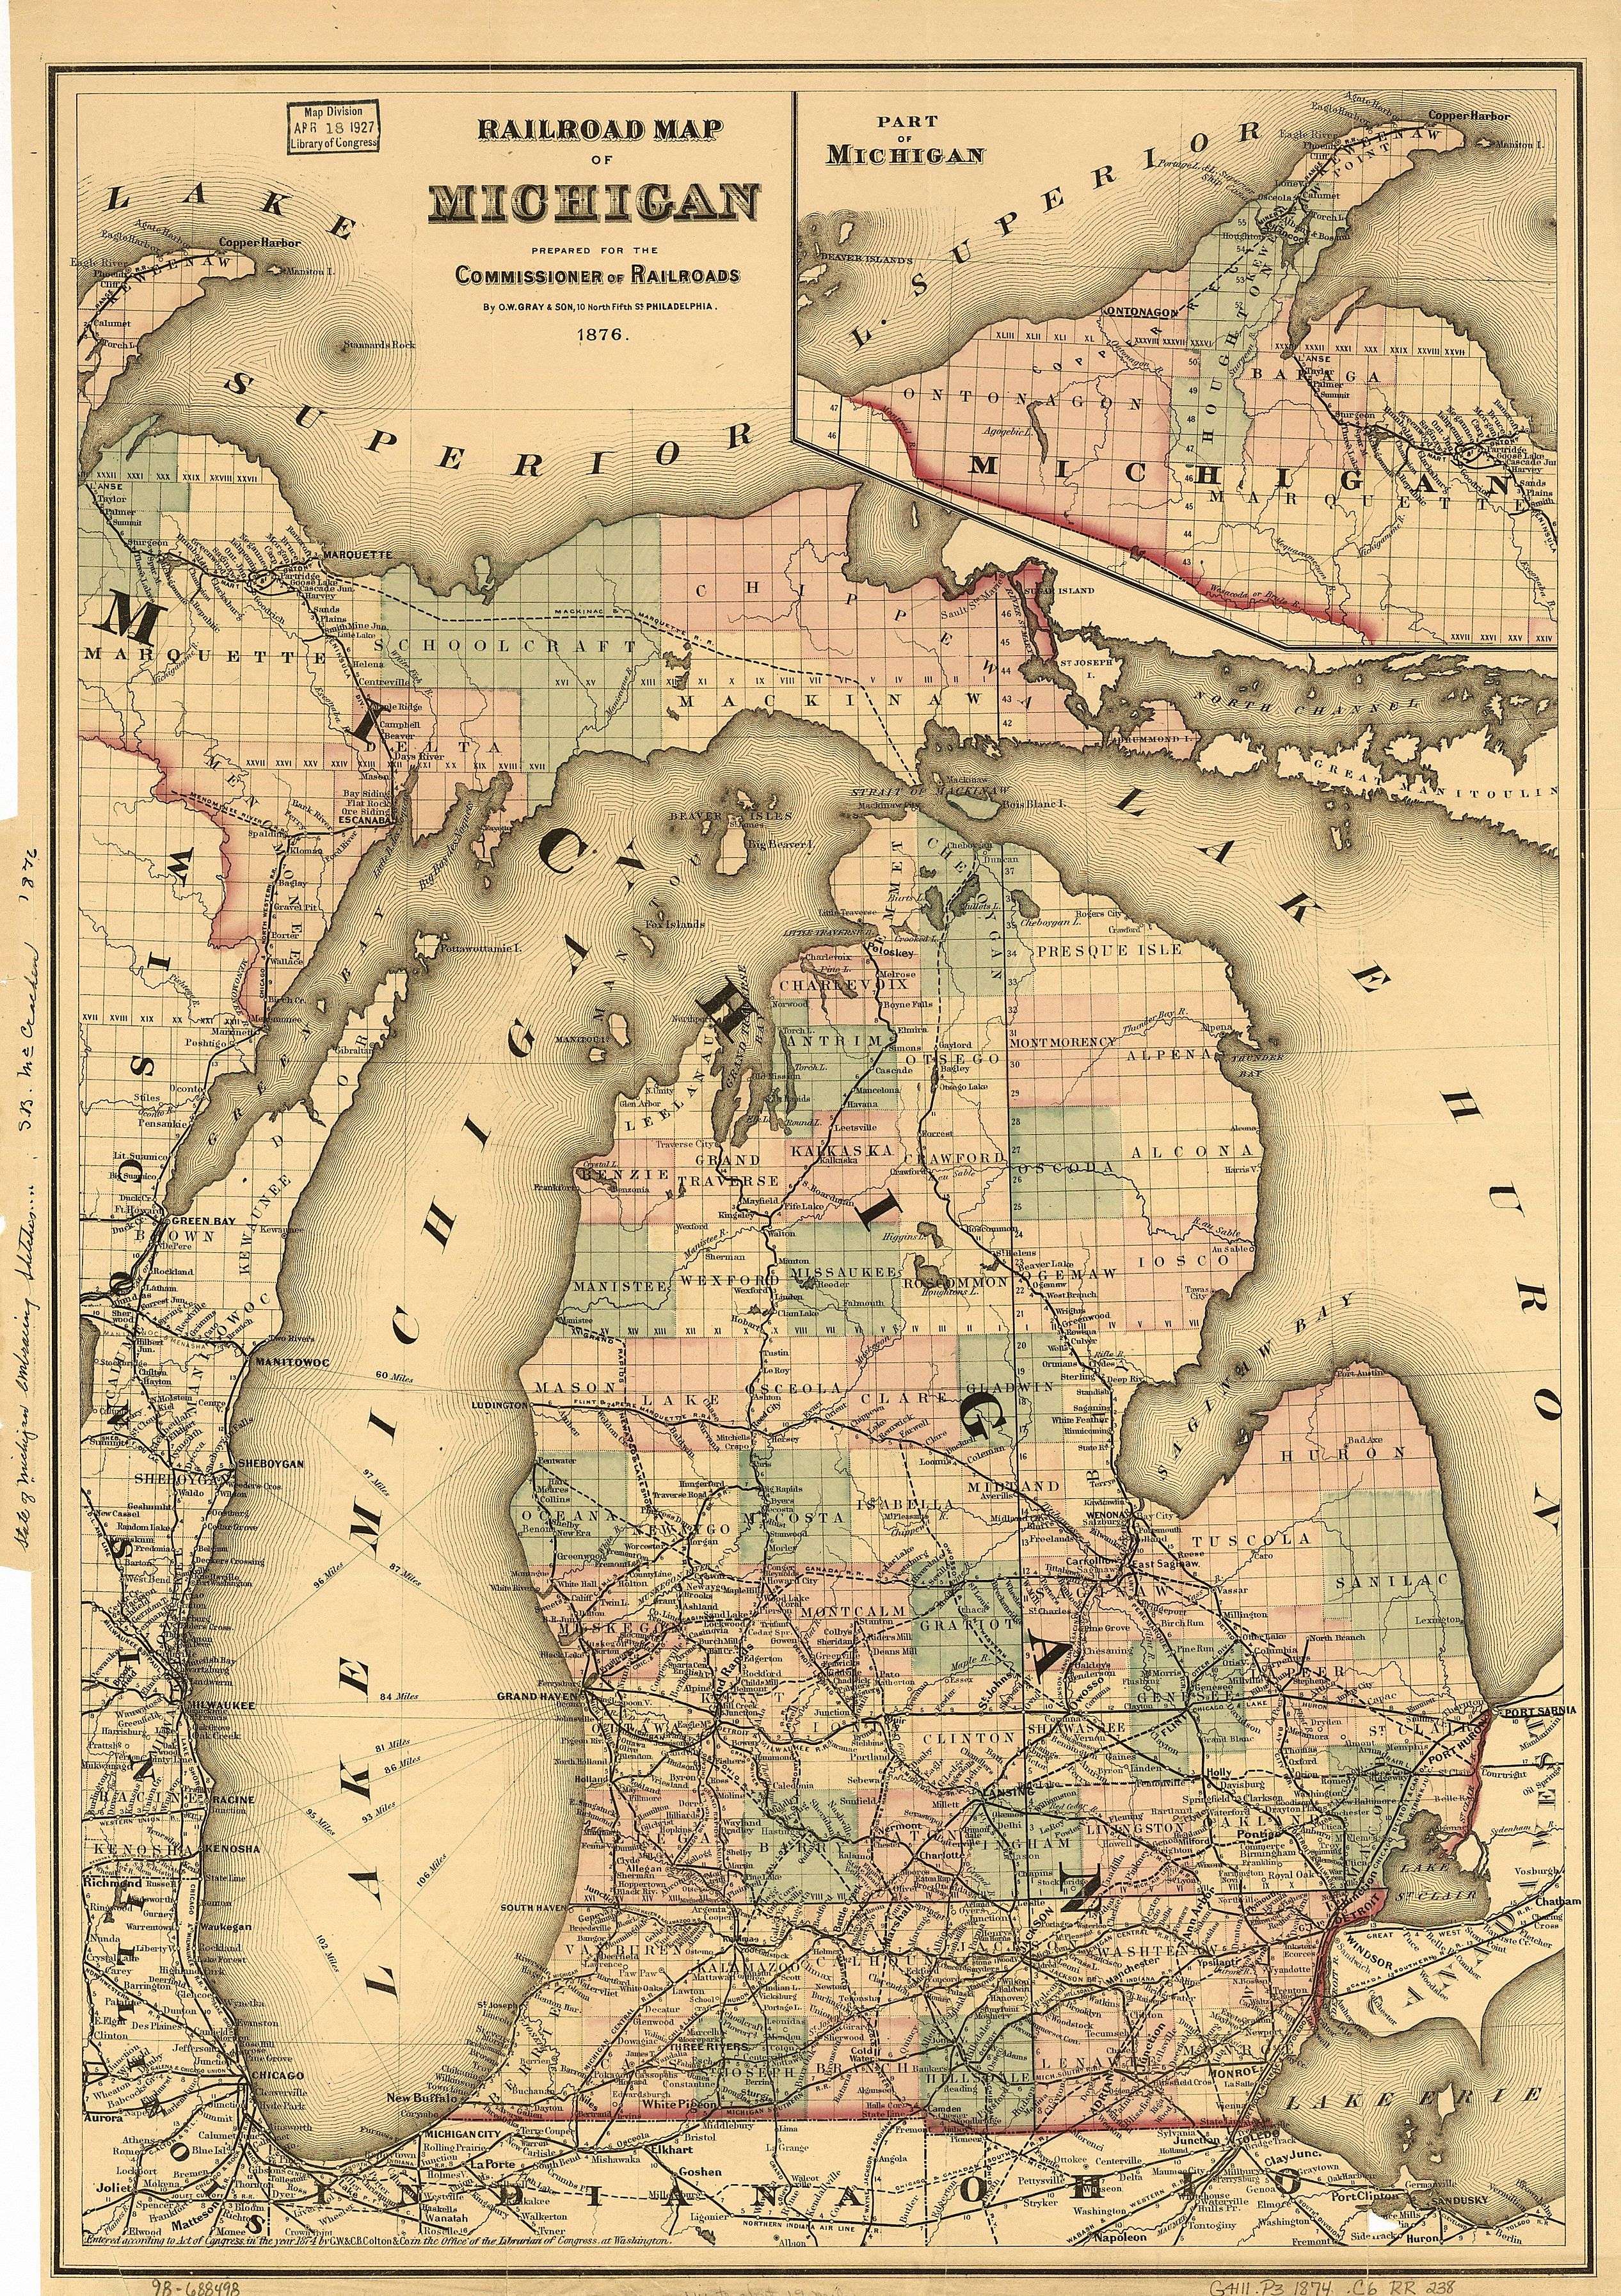 By 1876, the Grand Rapids and Indiana Railroad had built a line north to Petoskey. Petoskey became the county seat of Emmet County in 1902.